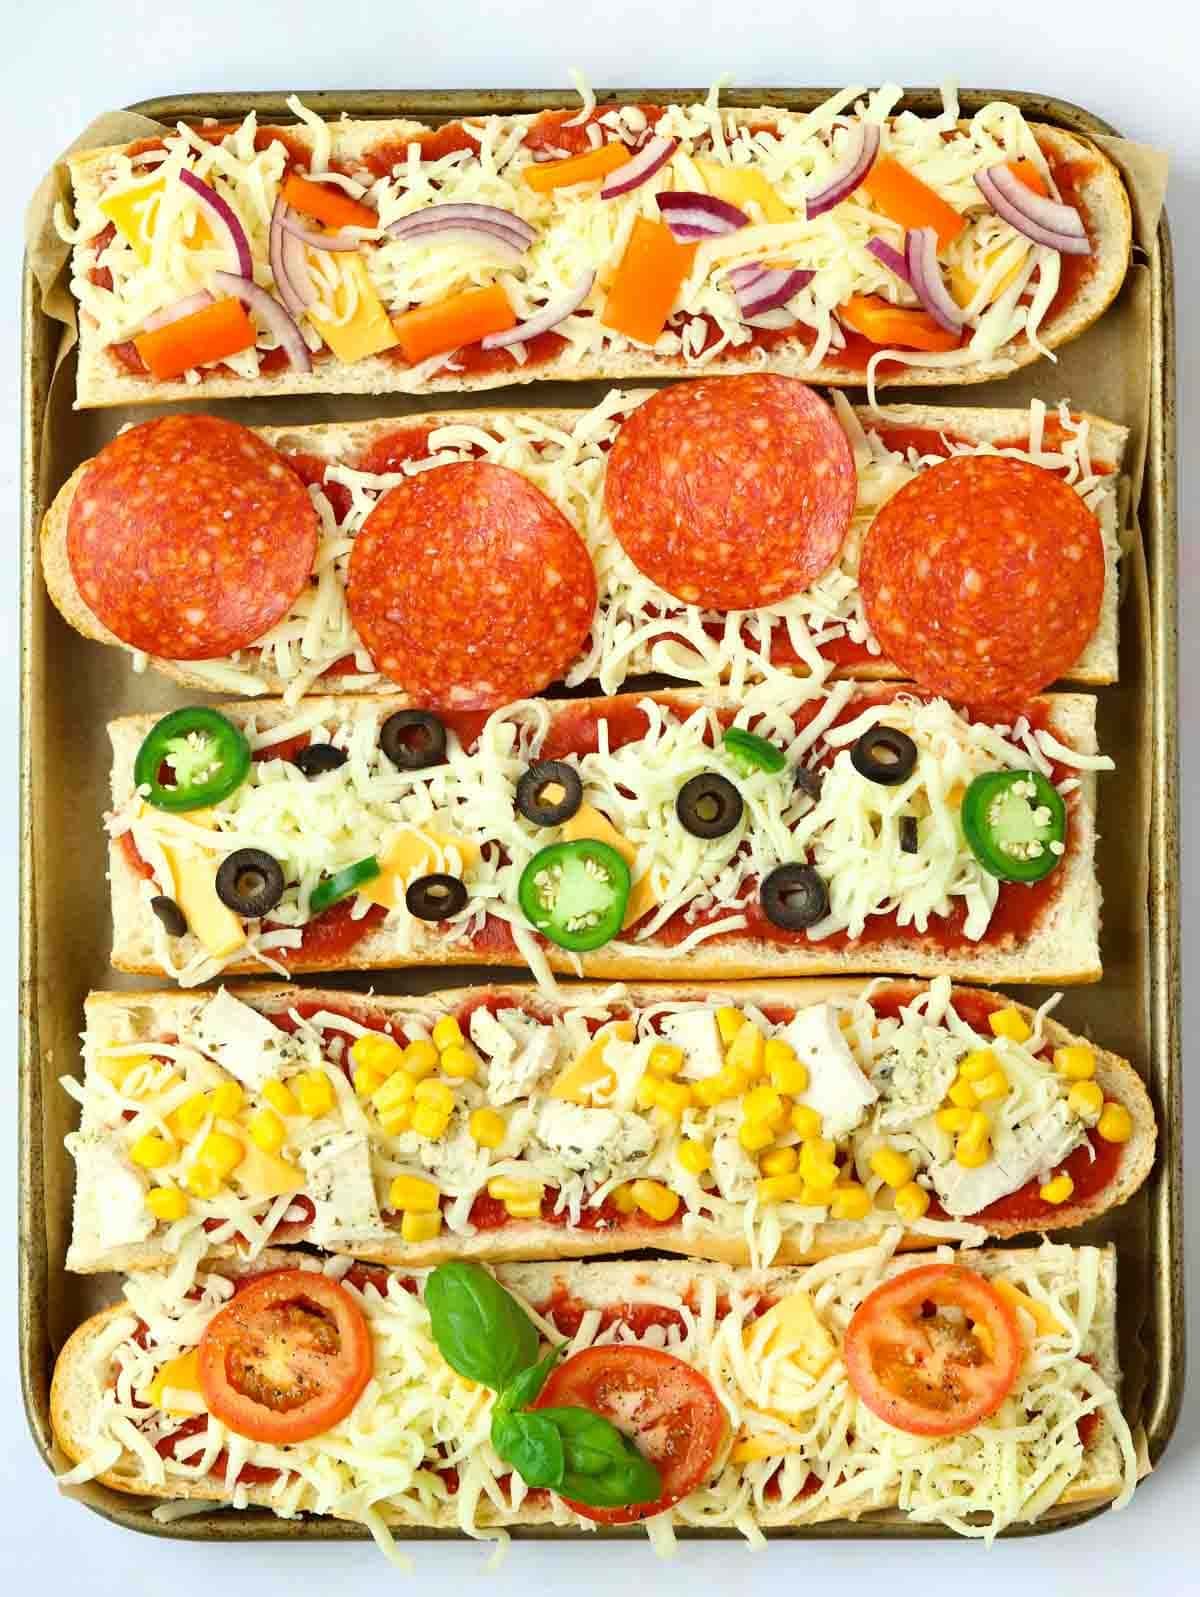 Five uncooked French Bread Pizzas on a baking tray with various toppings, ready to go in the oven.